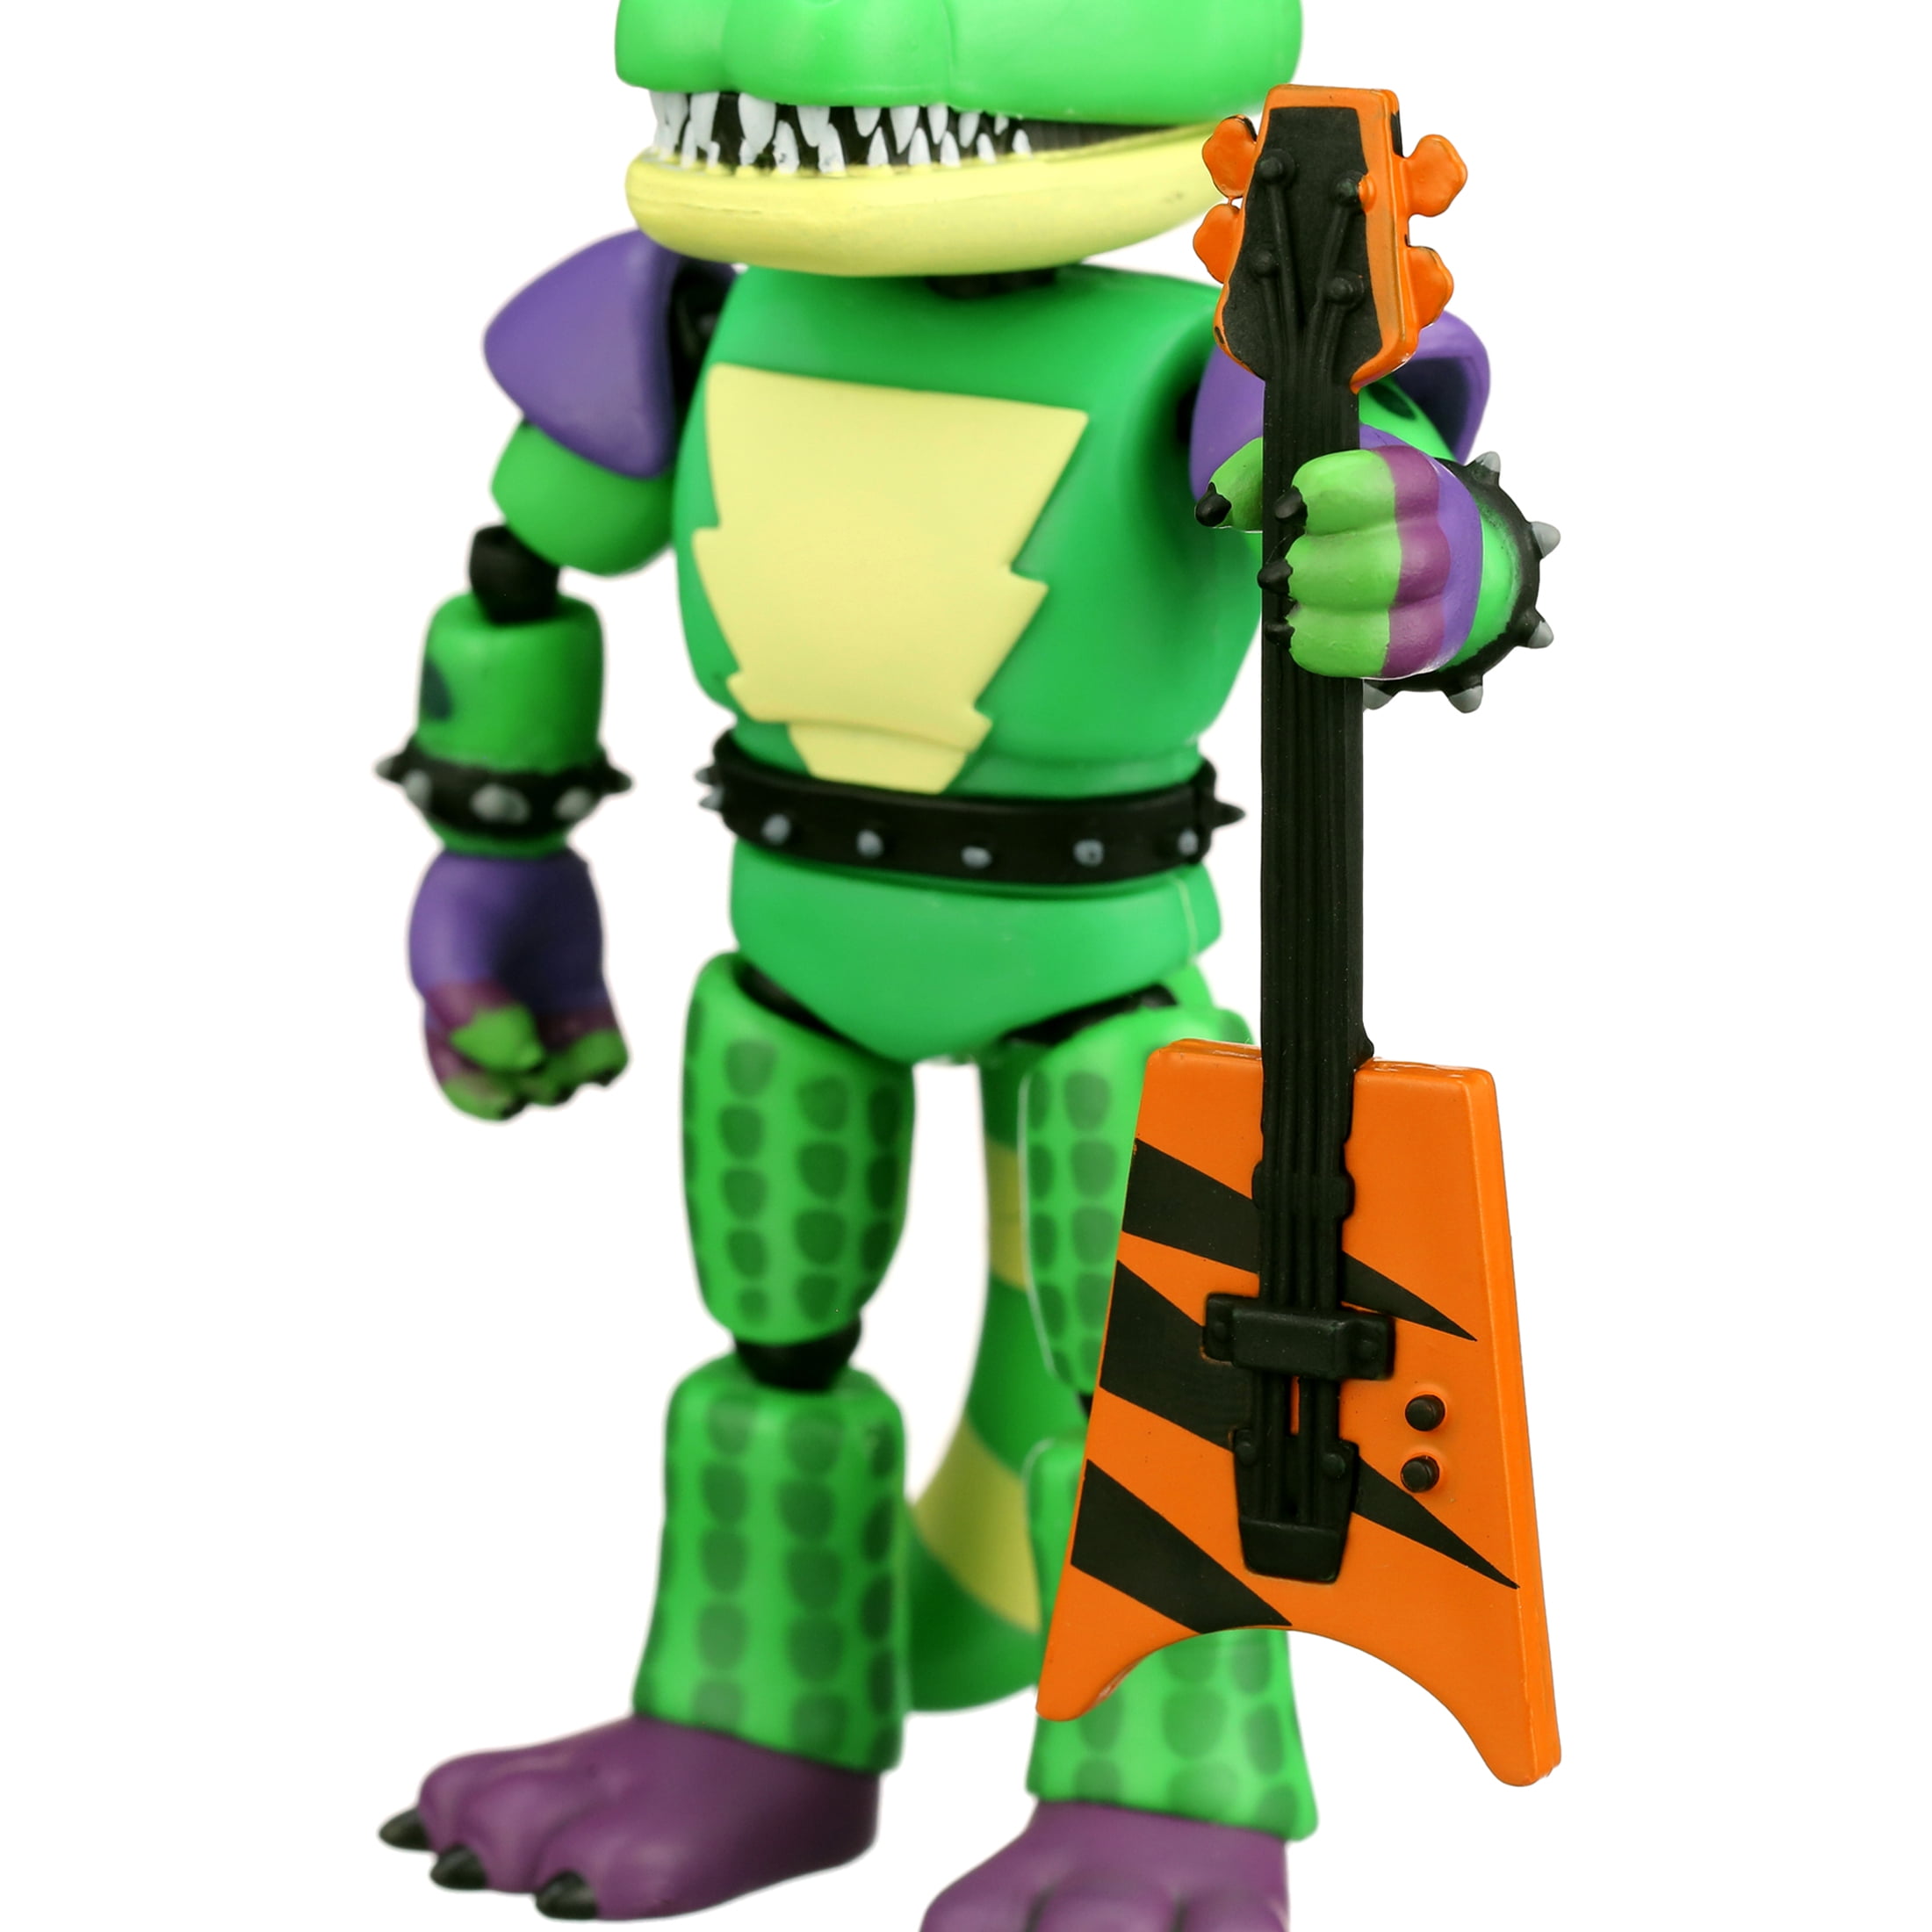 Five Nights at Freddys Security Breach 5.5 Inch Action Figure | Montgomery  Gator